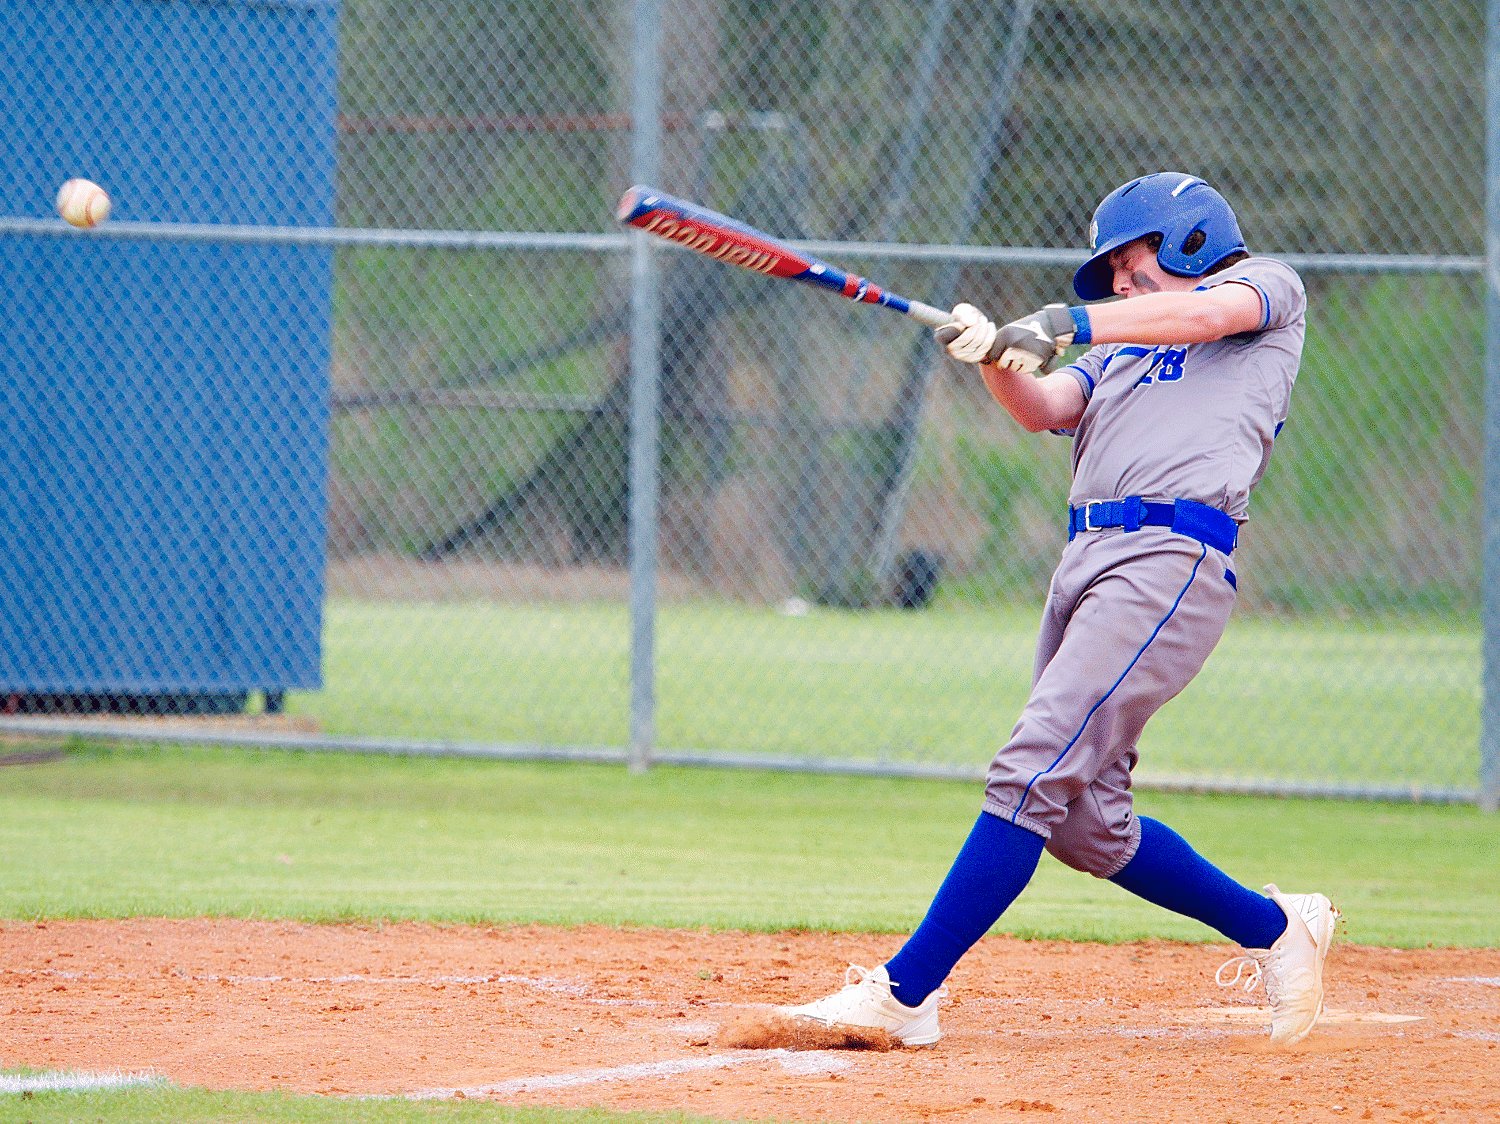 Payton Sapp gets a hit early Friday evening against Commerce.